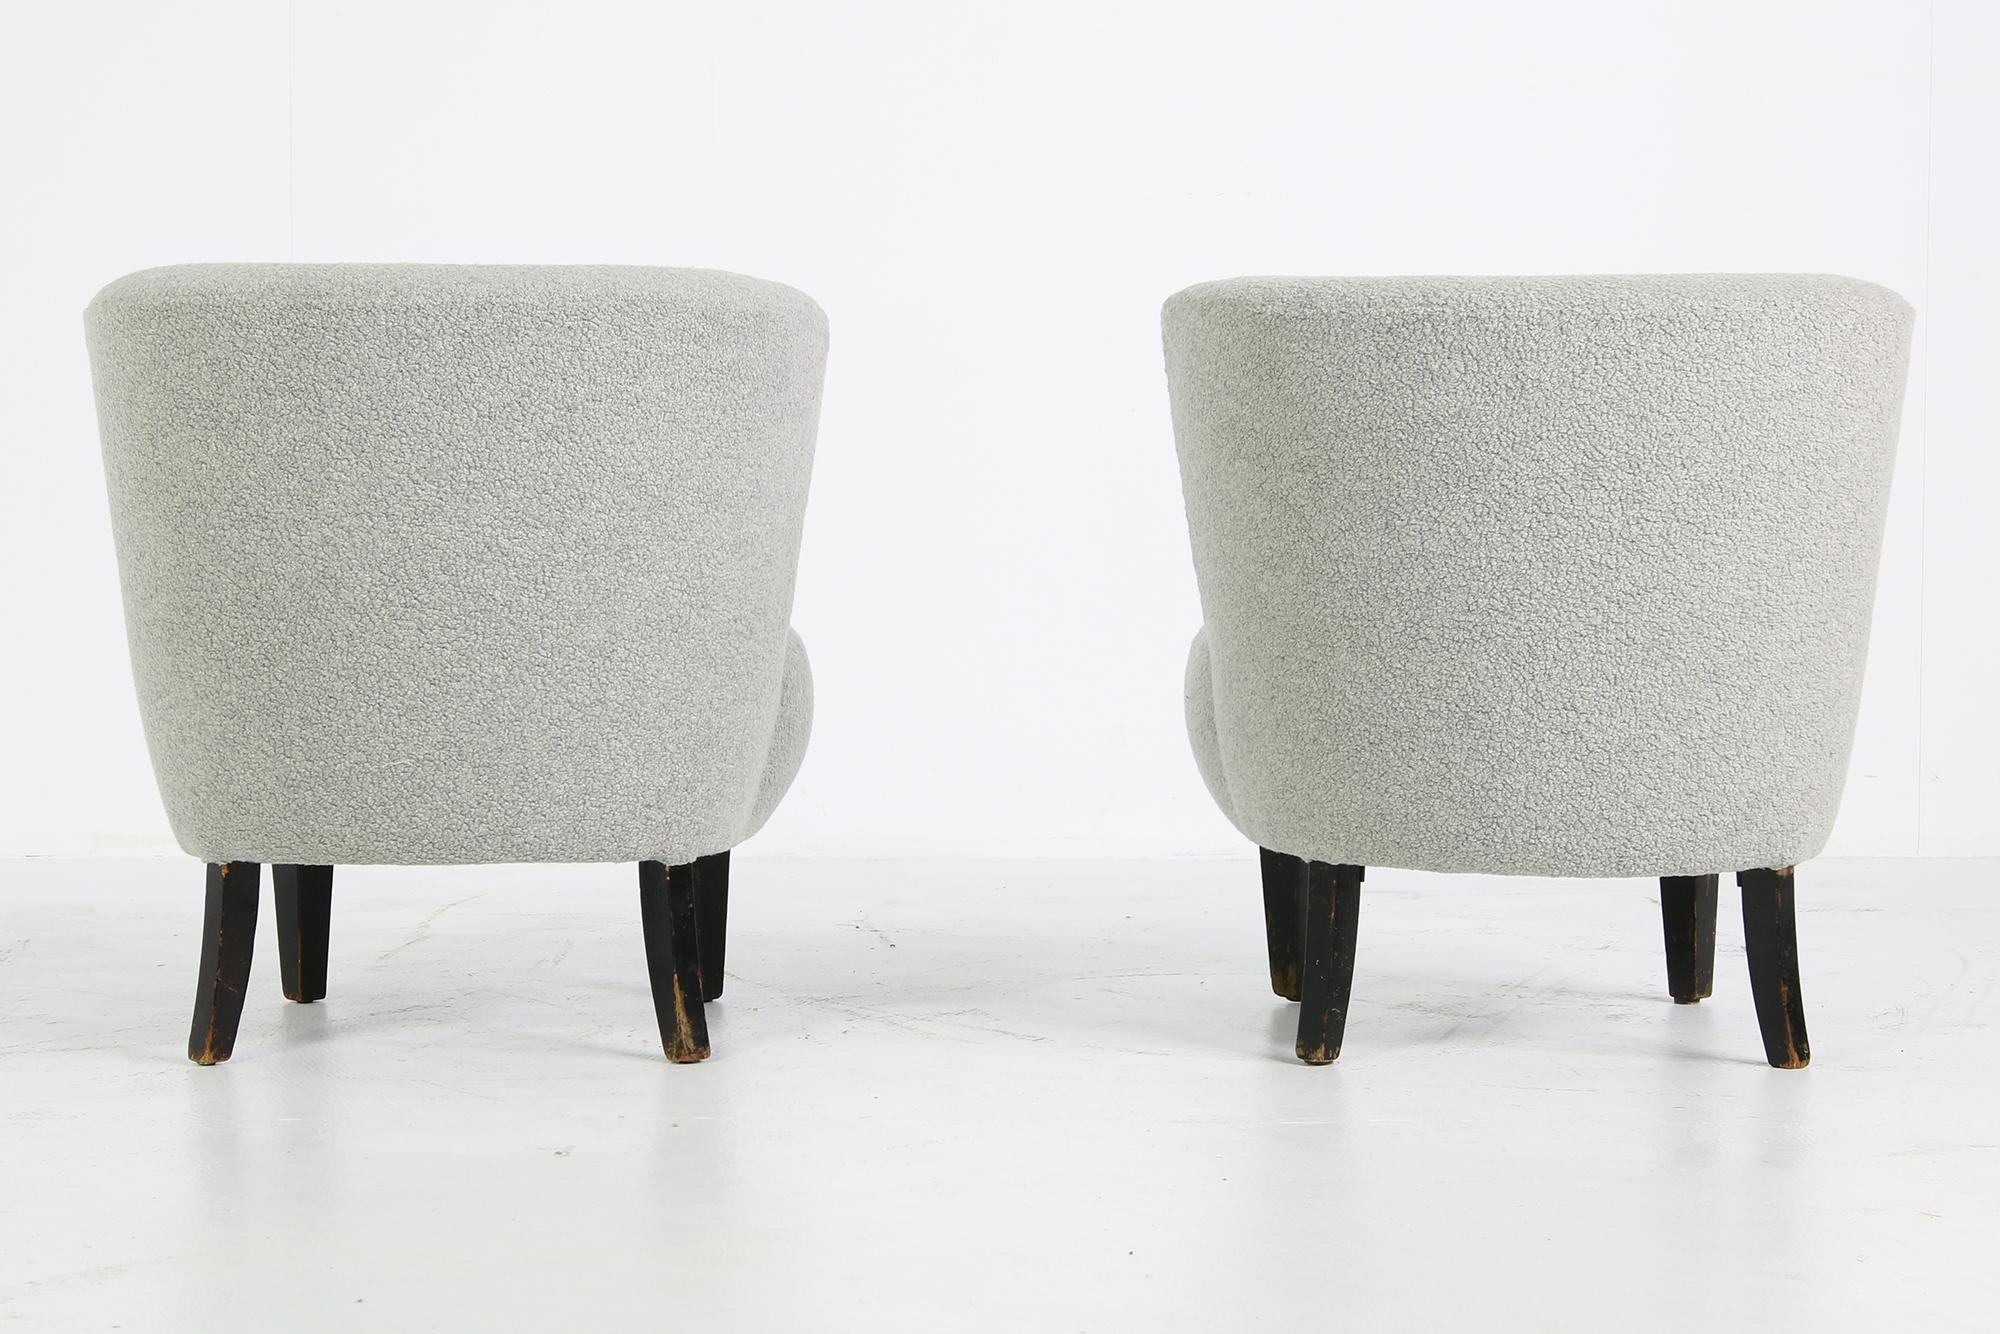 Pair of Curved Mid-Century Lounge Clam Chairs, Sweden 1950s, Boucle Fur, grey (Schwedisch)